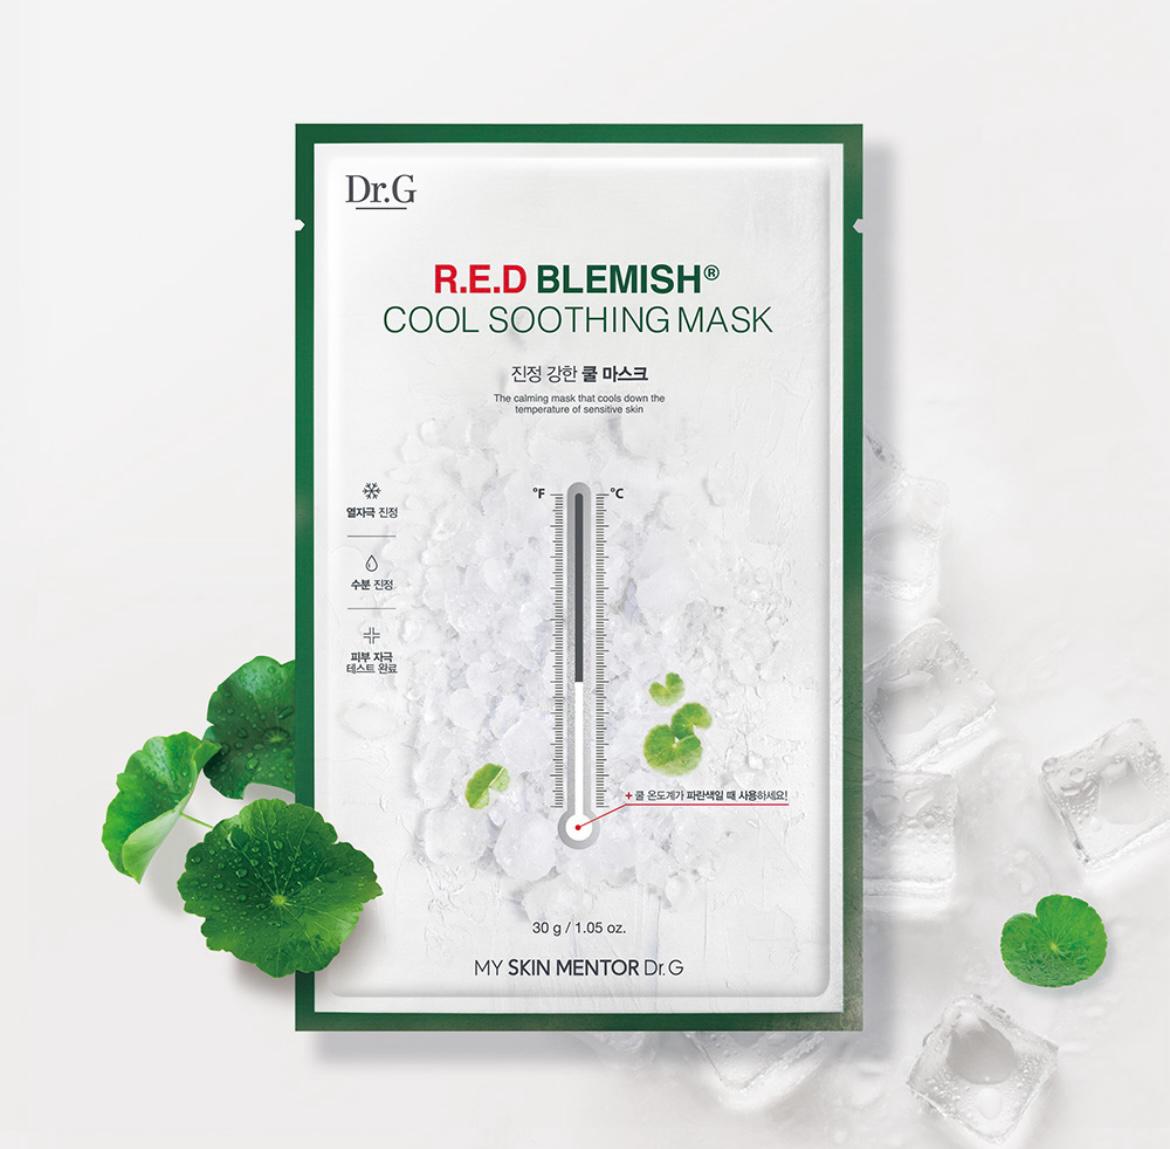 Dr.G Red Blemish Cool Soothing Mask : 10 masks per box